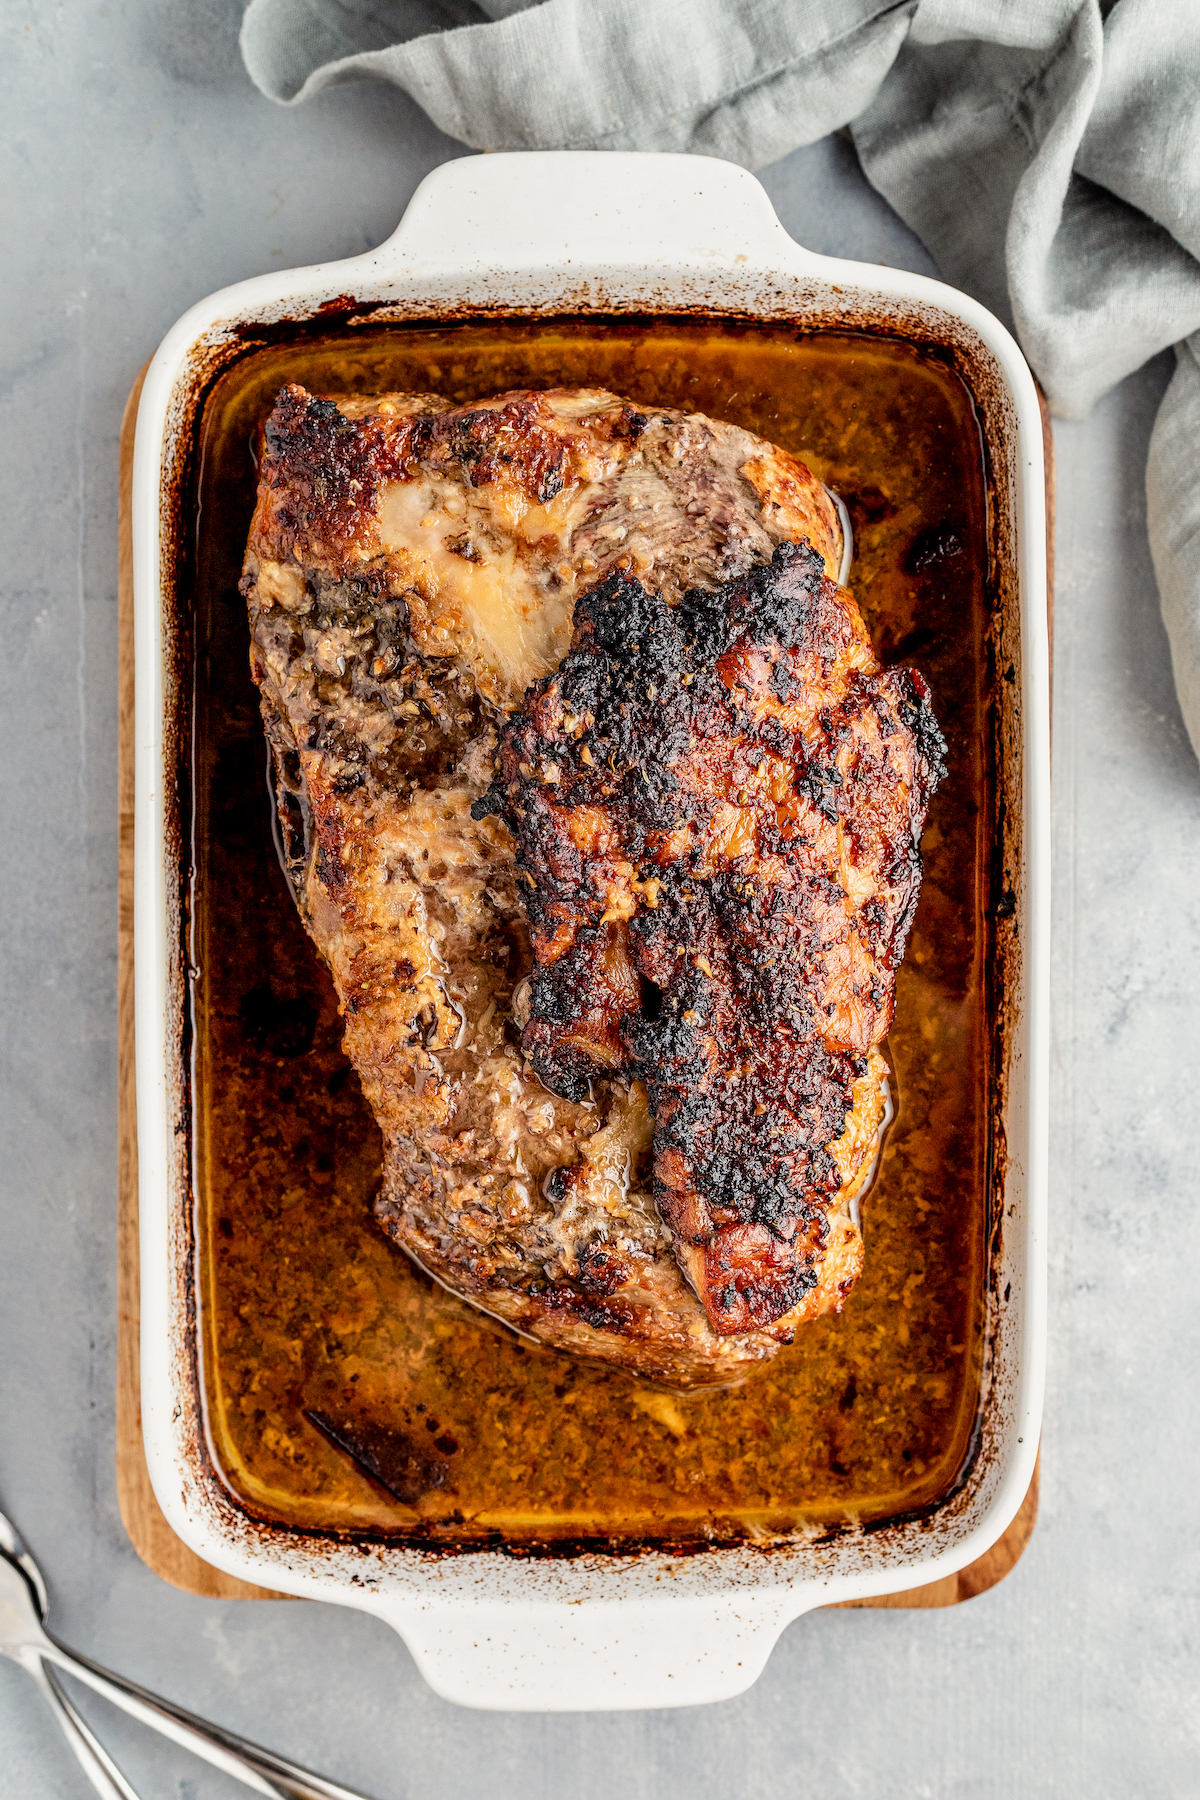 Roasted pork in the baking dish.